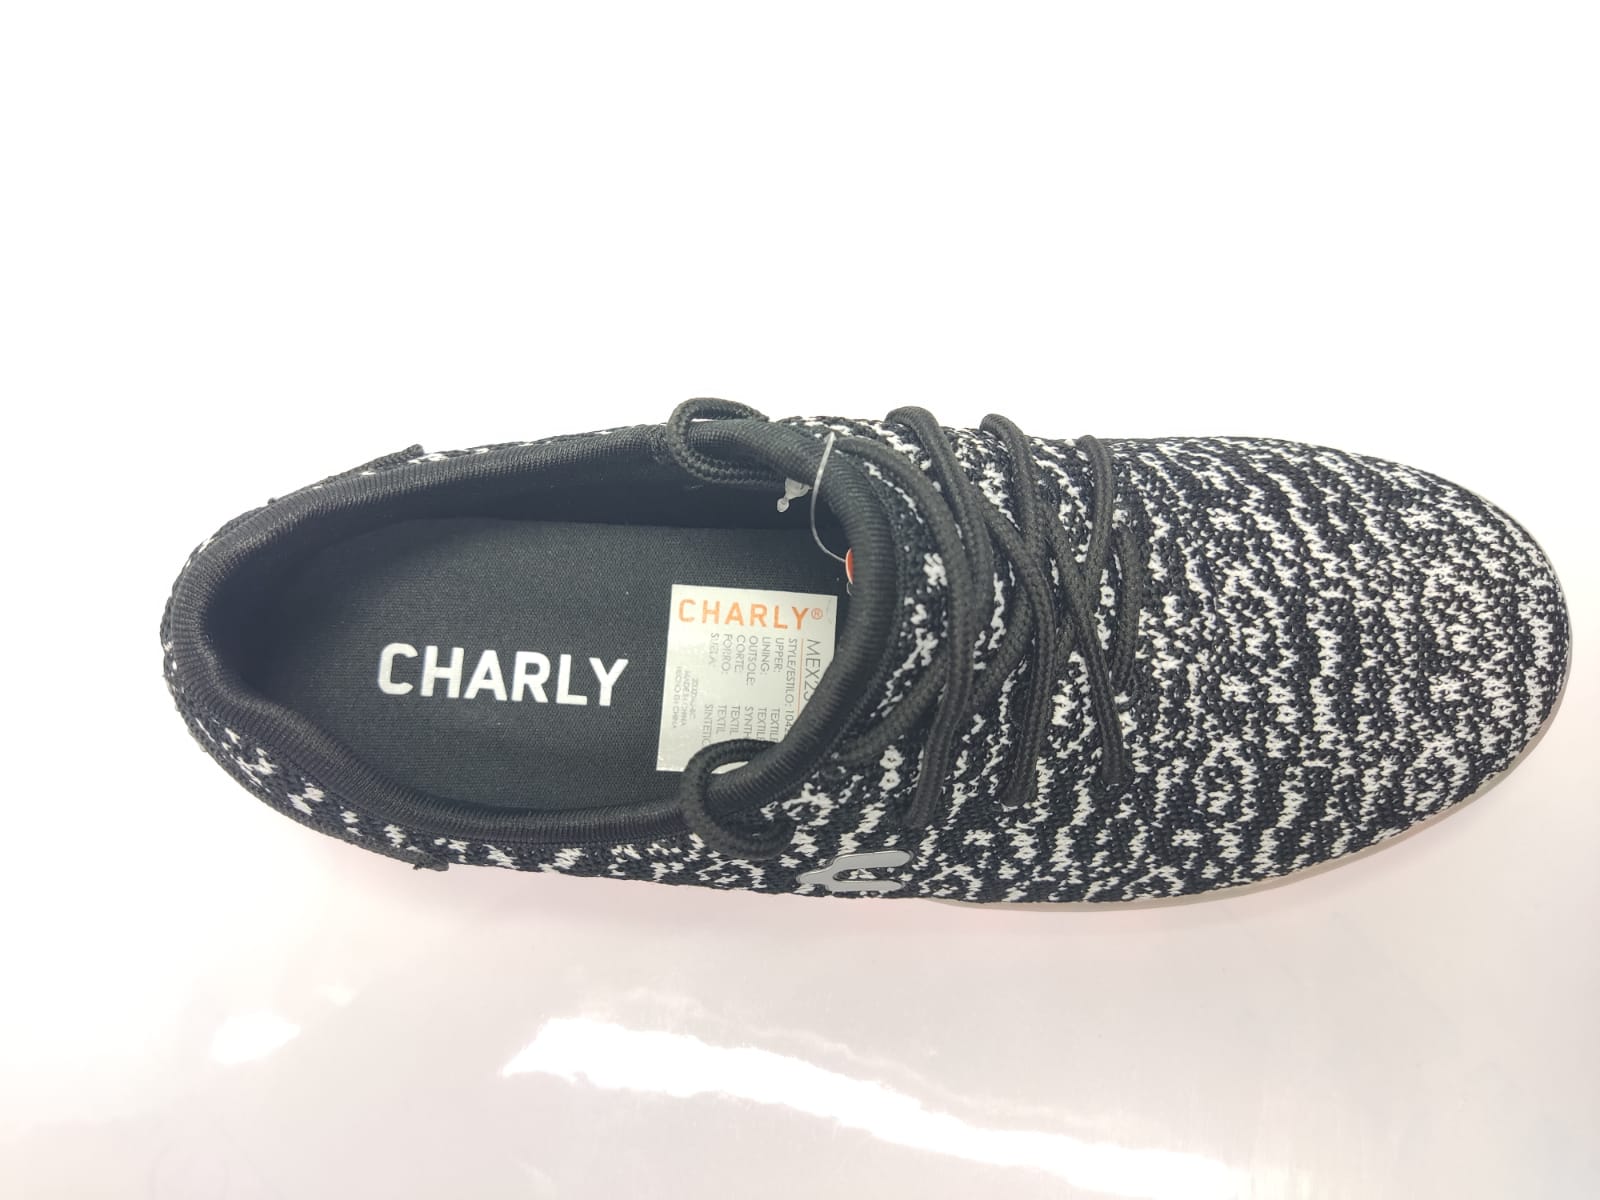 Tenis Charly con luz Led 1042204 Negro/Blanco – NOLAKGUES